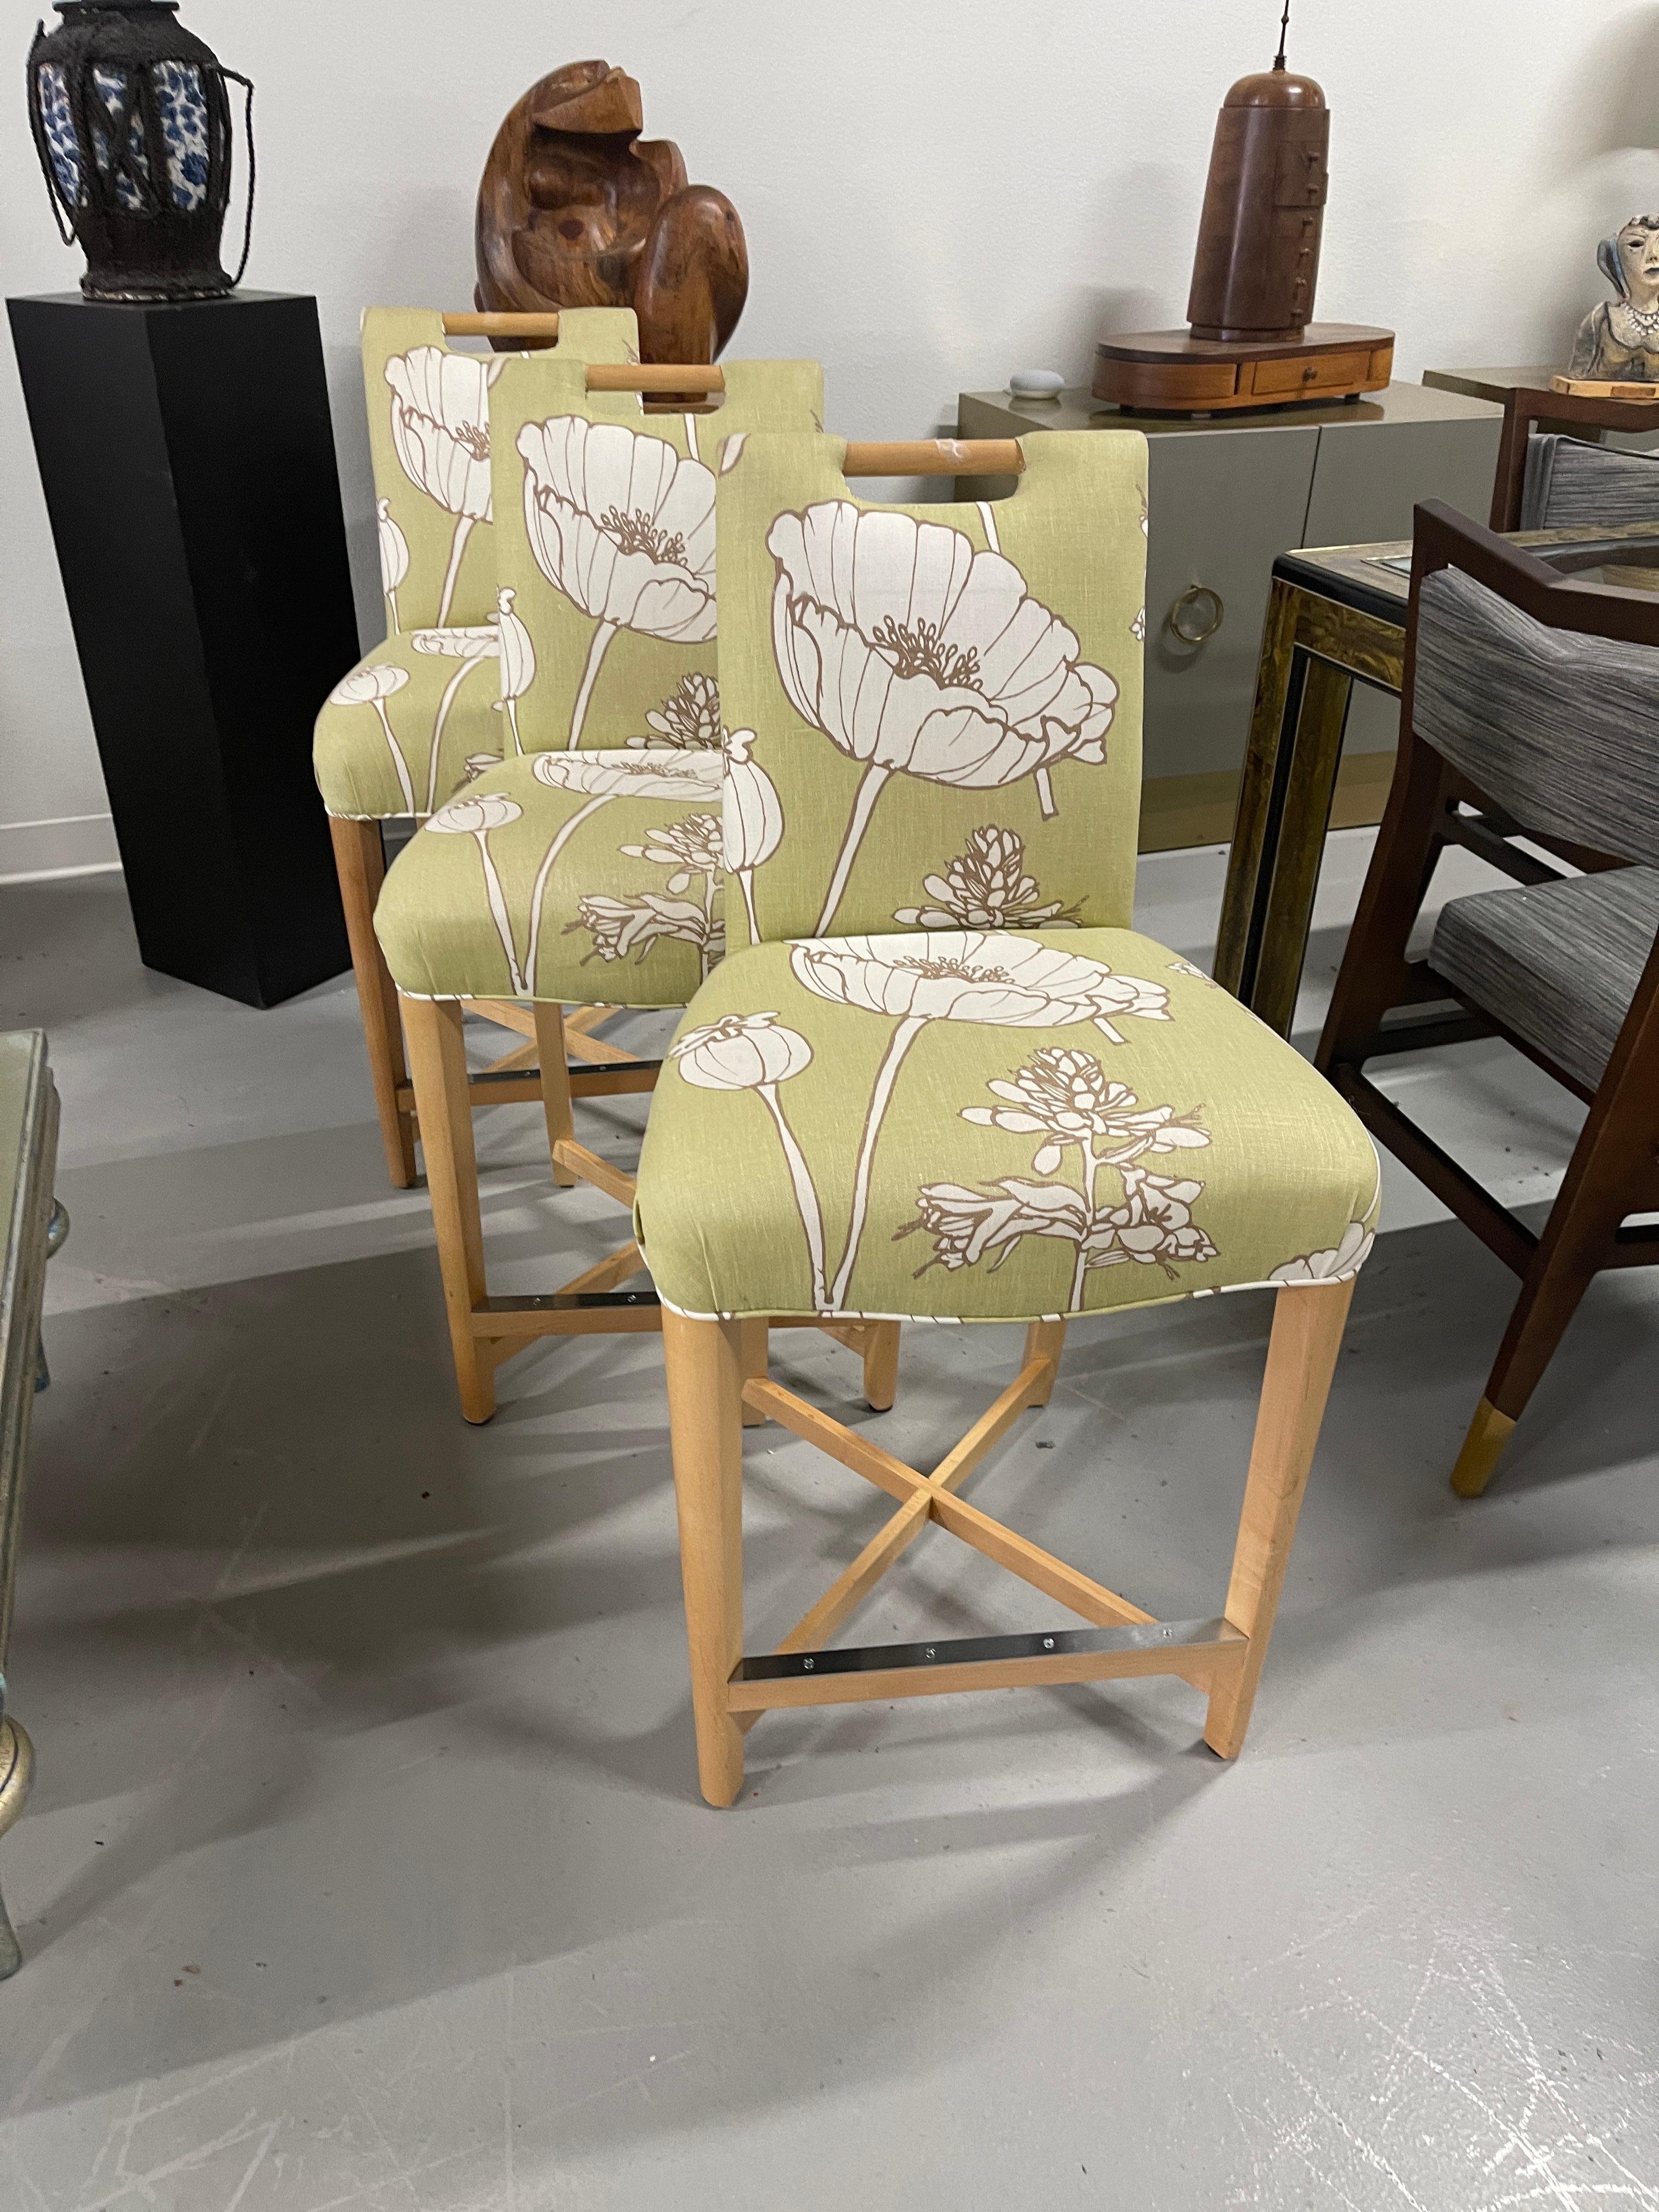 Set of three Donghia Barstools, with a pretty floral pattern. I believe the hardwood frame to be Maple. The stools have a metal reinforced piece on the foot rest. They are in good vintage condition, although there is some slight fraying at the top